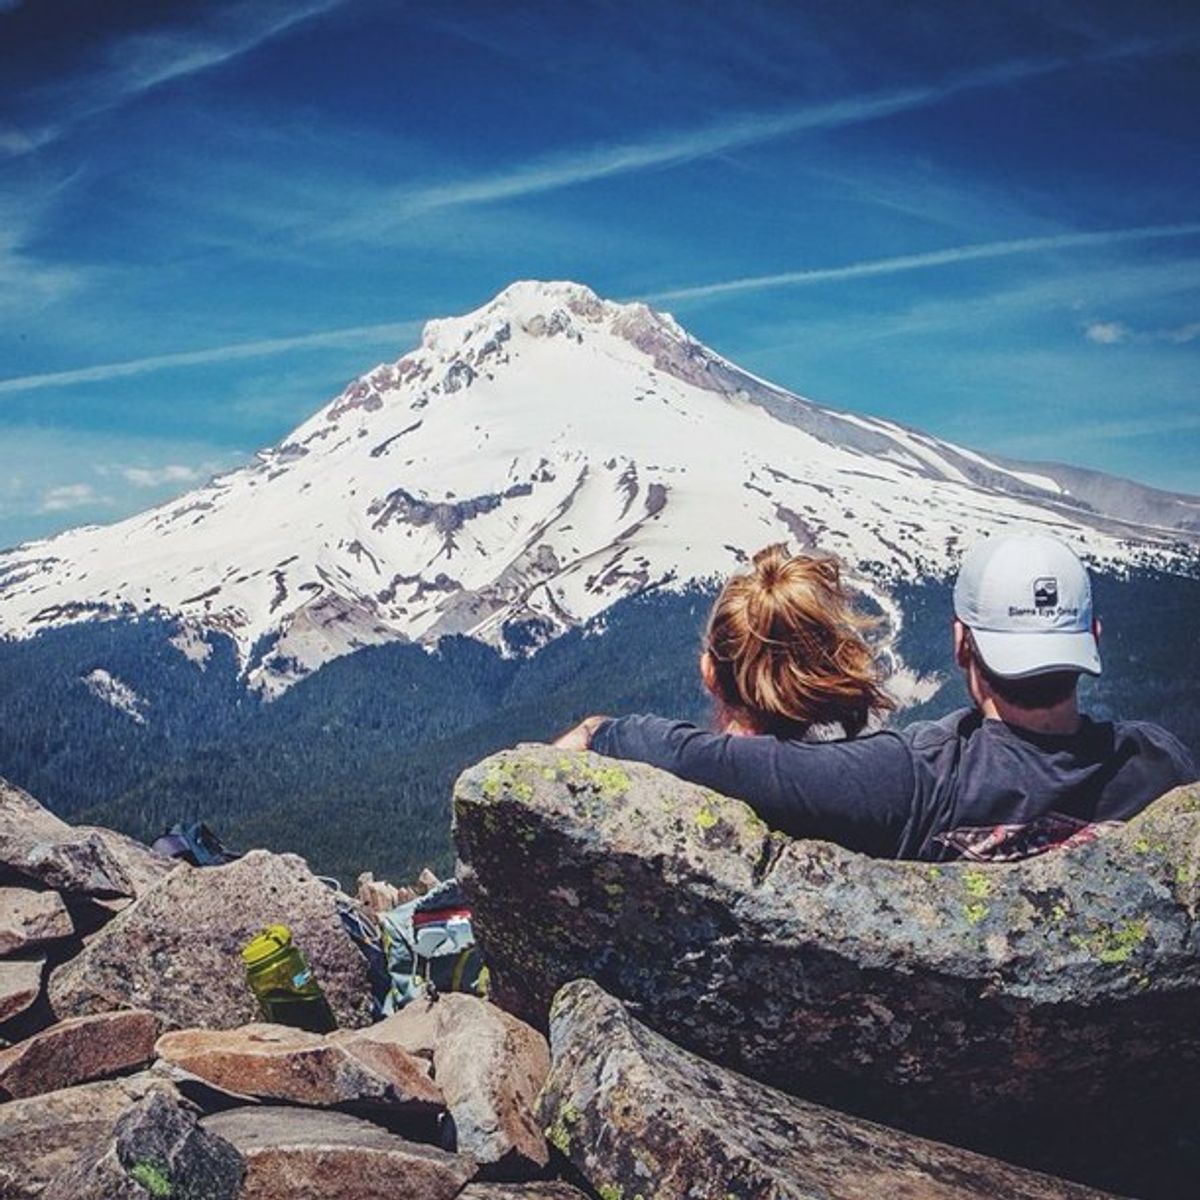 9 "Firsts" to Achieve With Your Significant Other